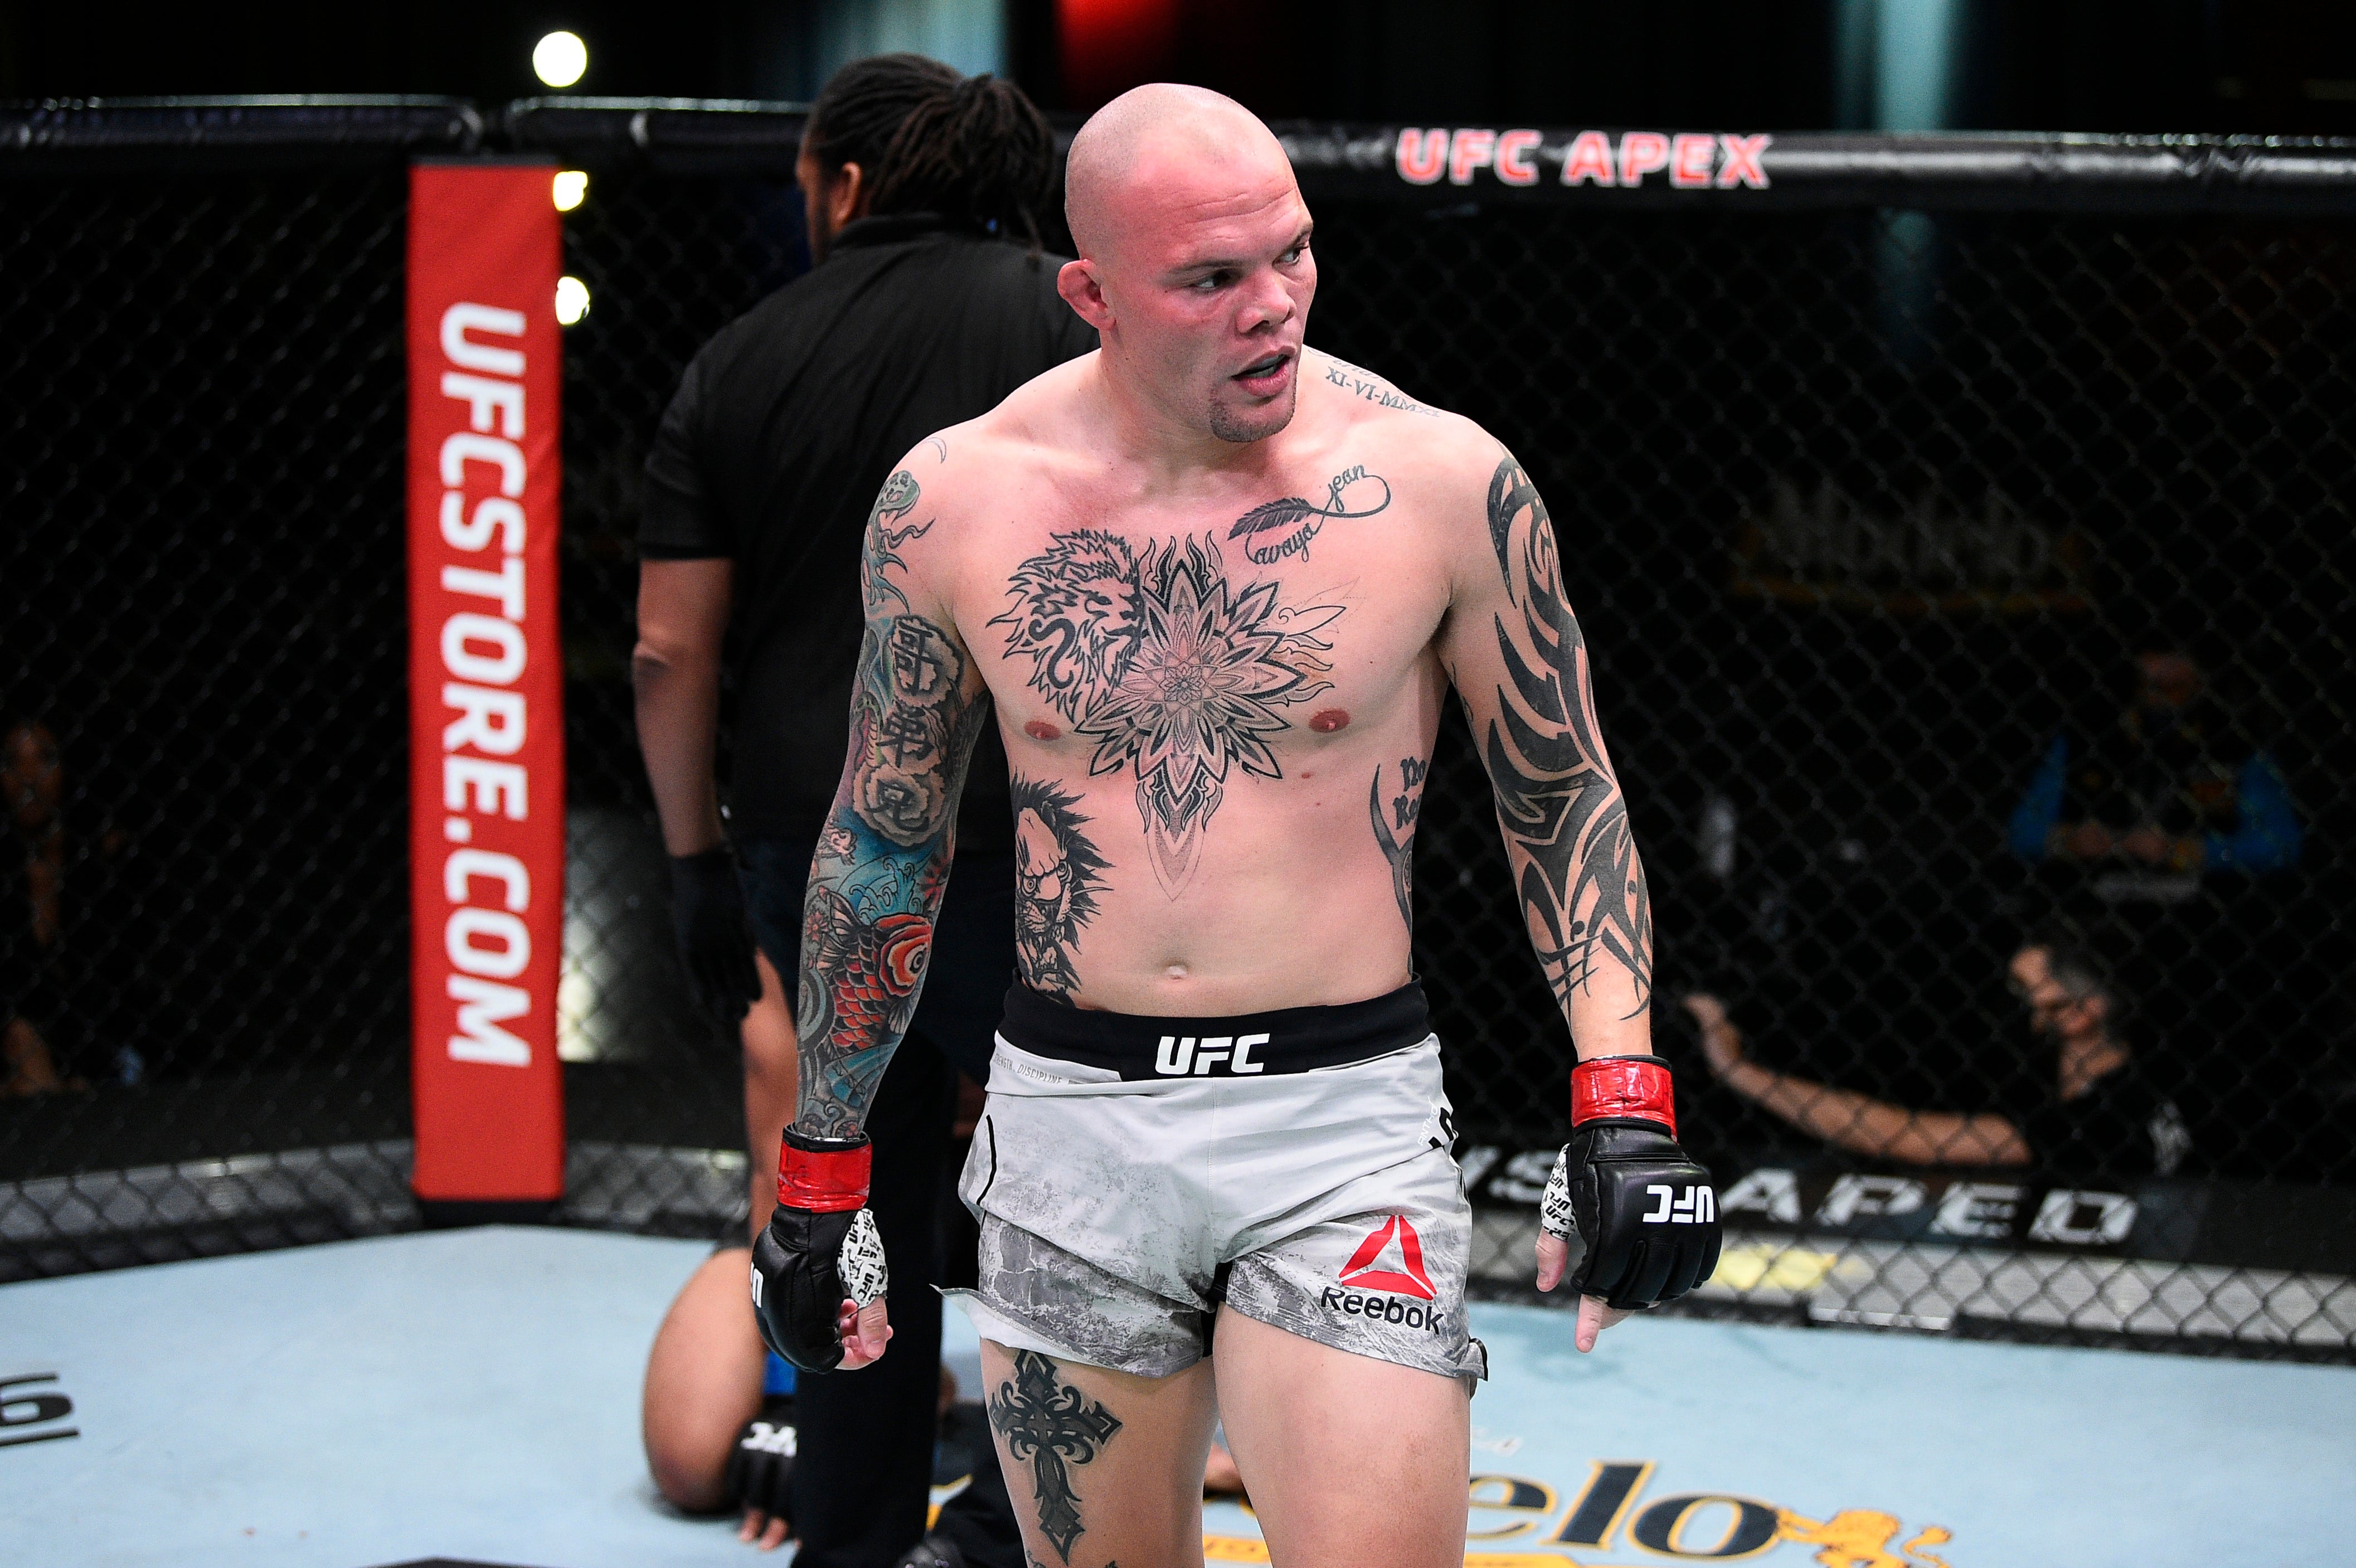 UFC light heavyweight Anthony Smith fought for the division’s title in 2019